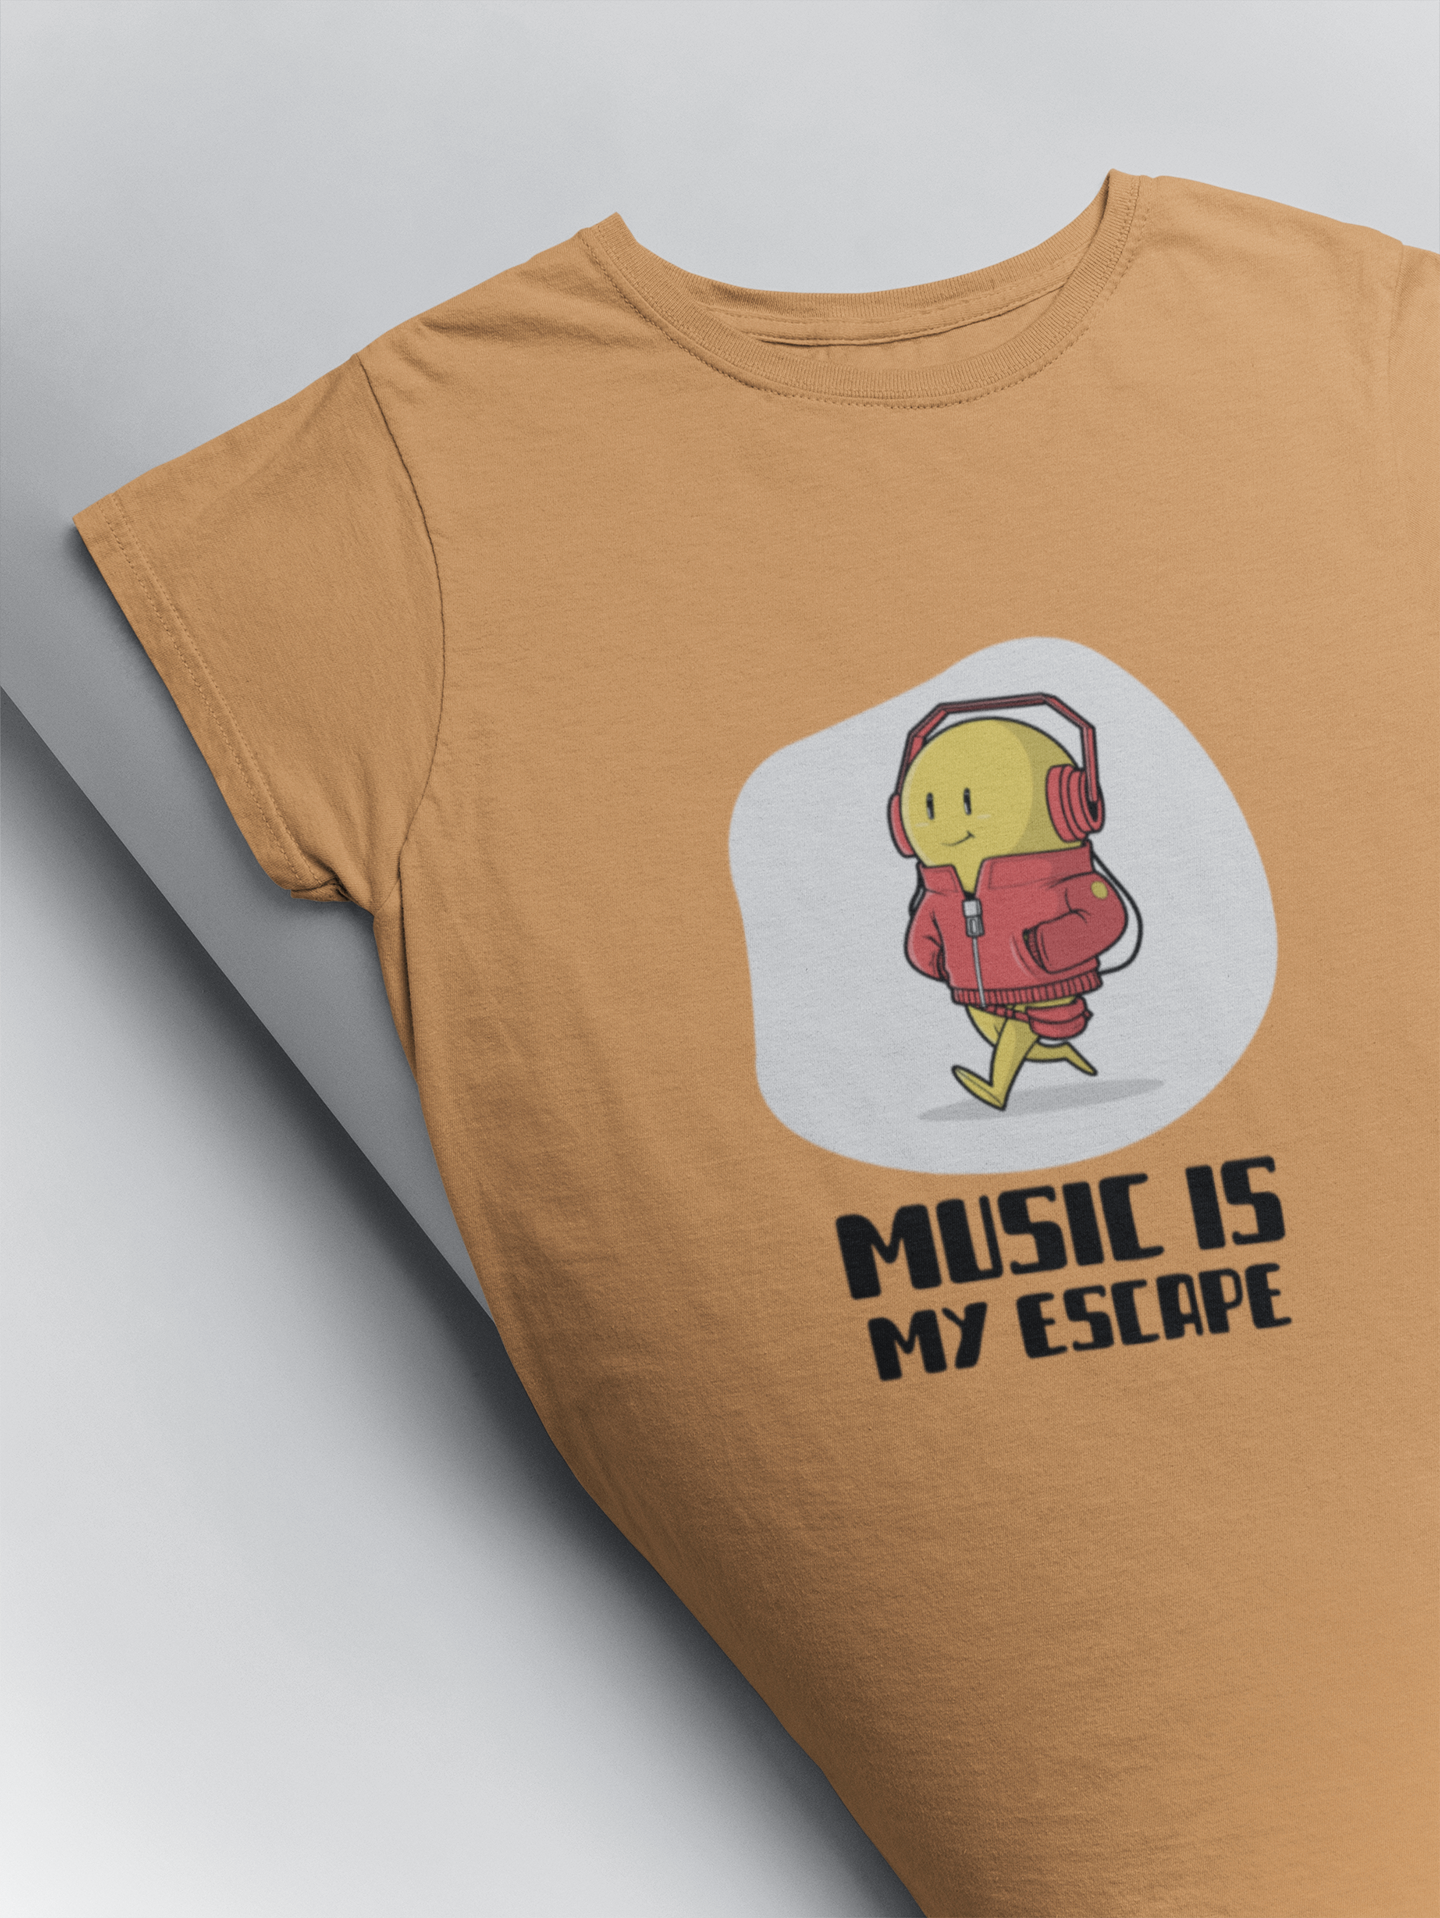 Music is my escape printed t shirts for music lovers by Muselot